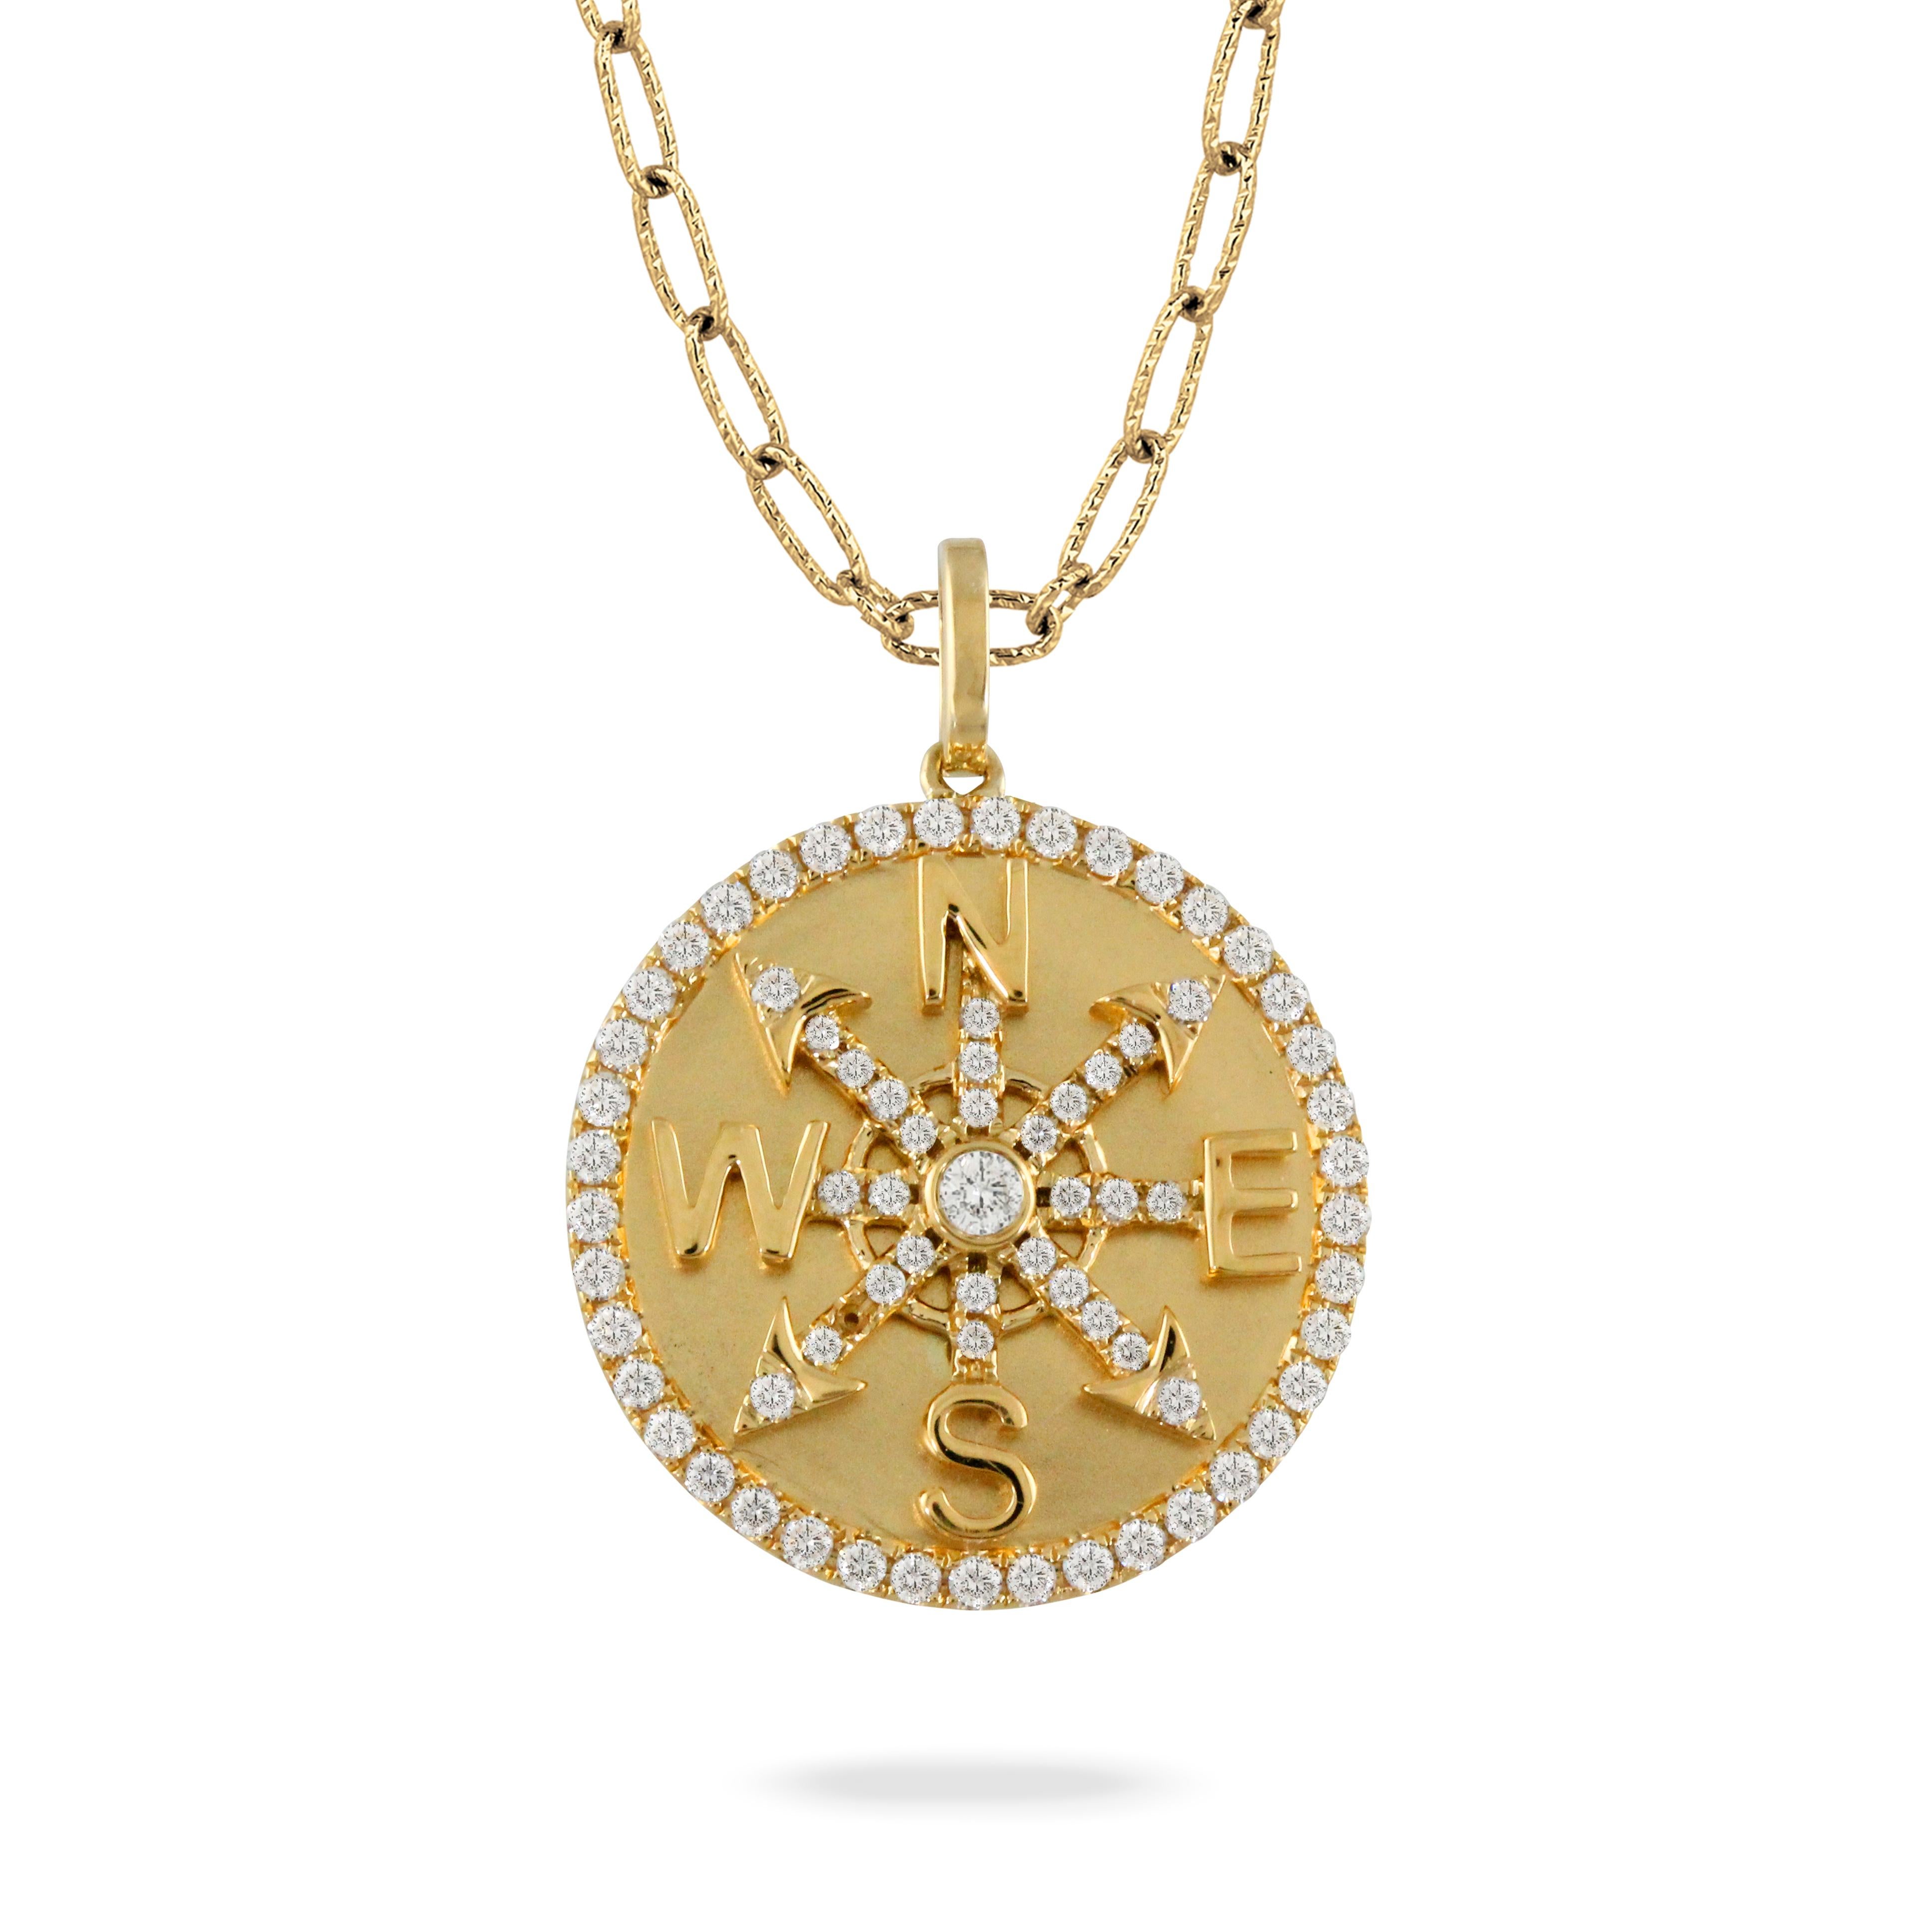 Brand new pendant by Doves Doron Paloma, with 0.66ctw H/VS diamonds. Does not come with chain.  Pendant is 22mm in diameter x 29mm with bale. Weight - 5.7 grams. Marked: 18k, Dove hallmark.